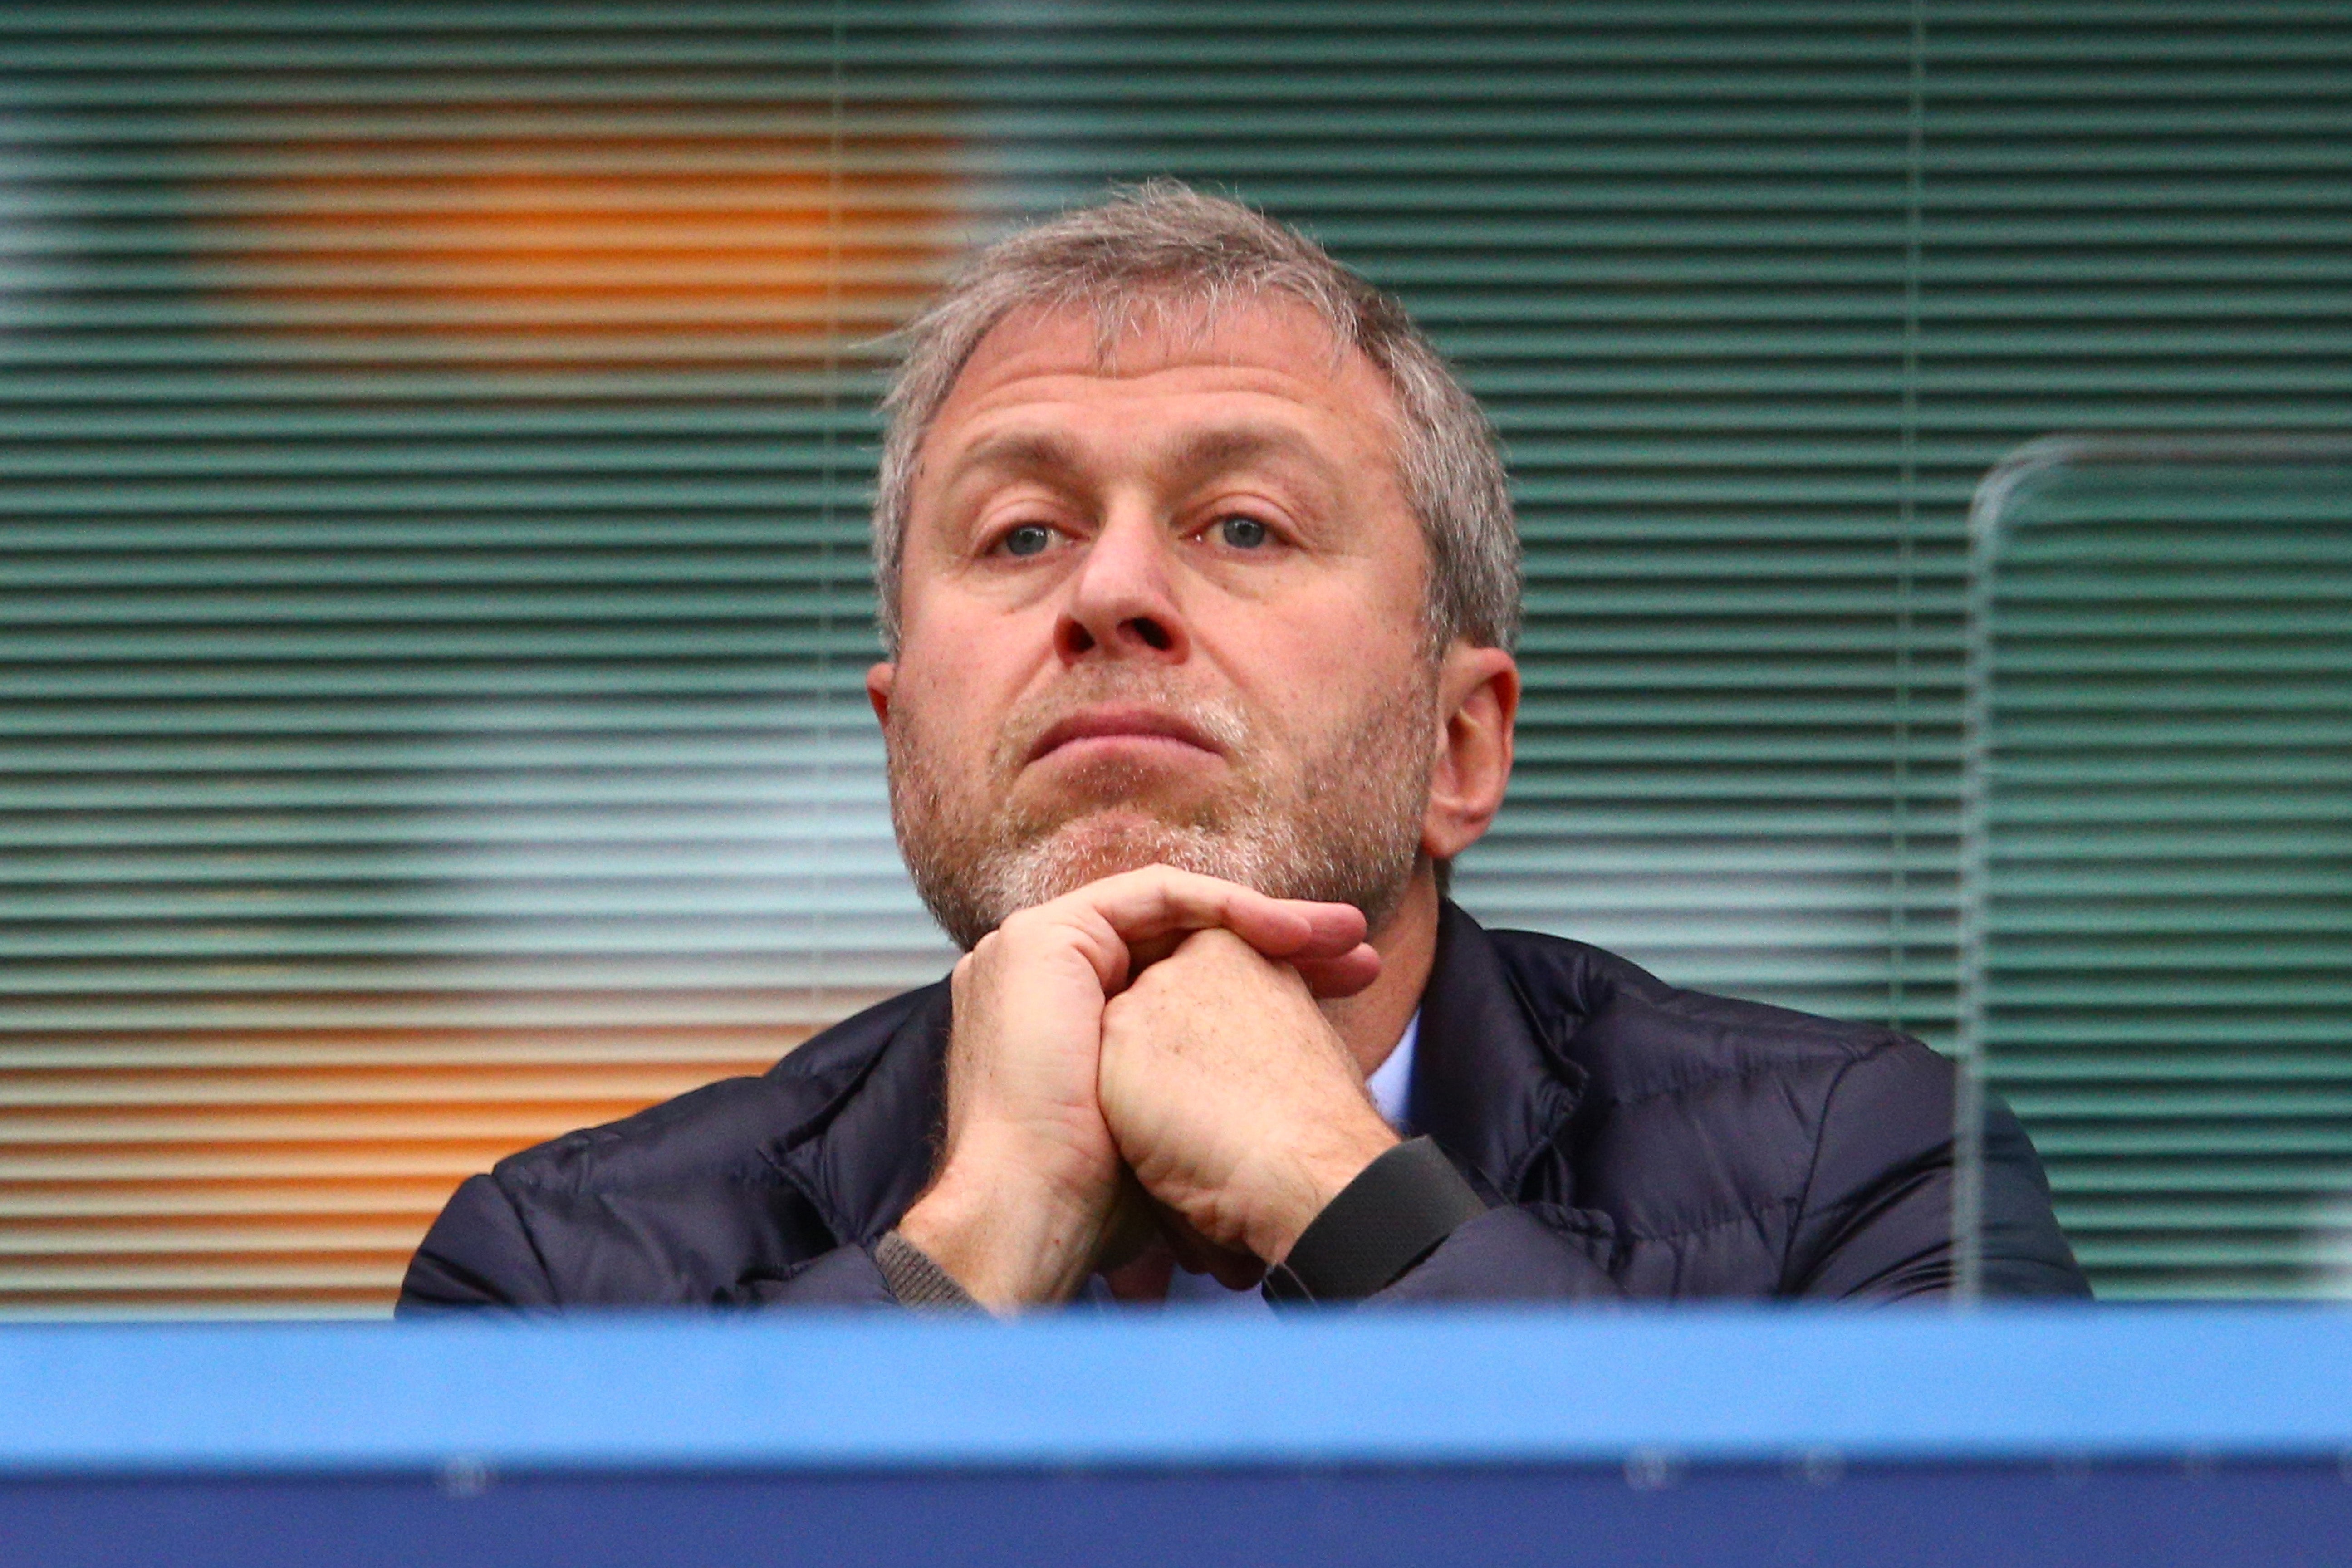 Roman Abramovich has taken a step back from Chelsea in the wake of Russia’s invasion of Ukraine